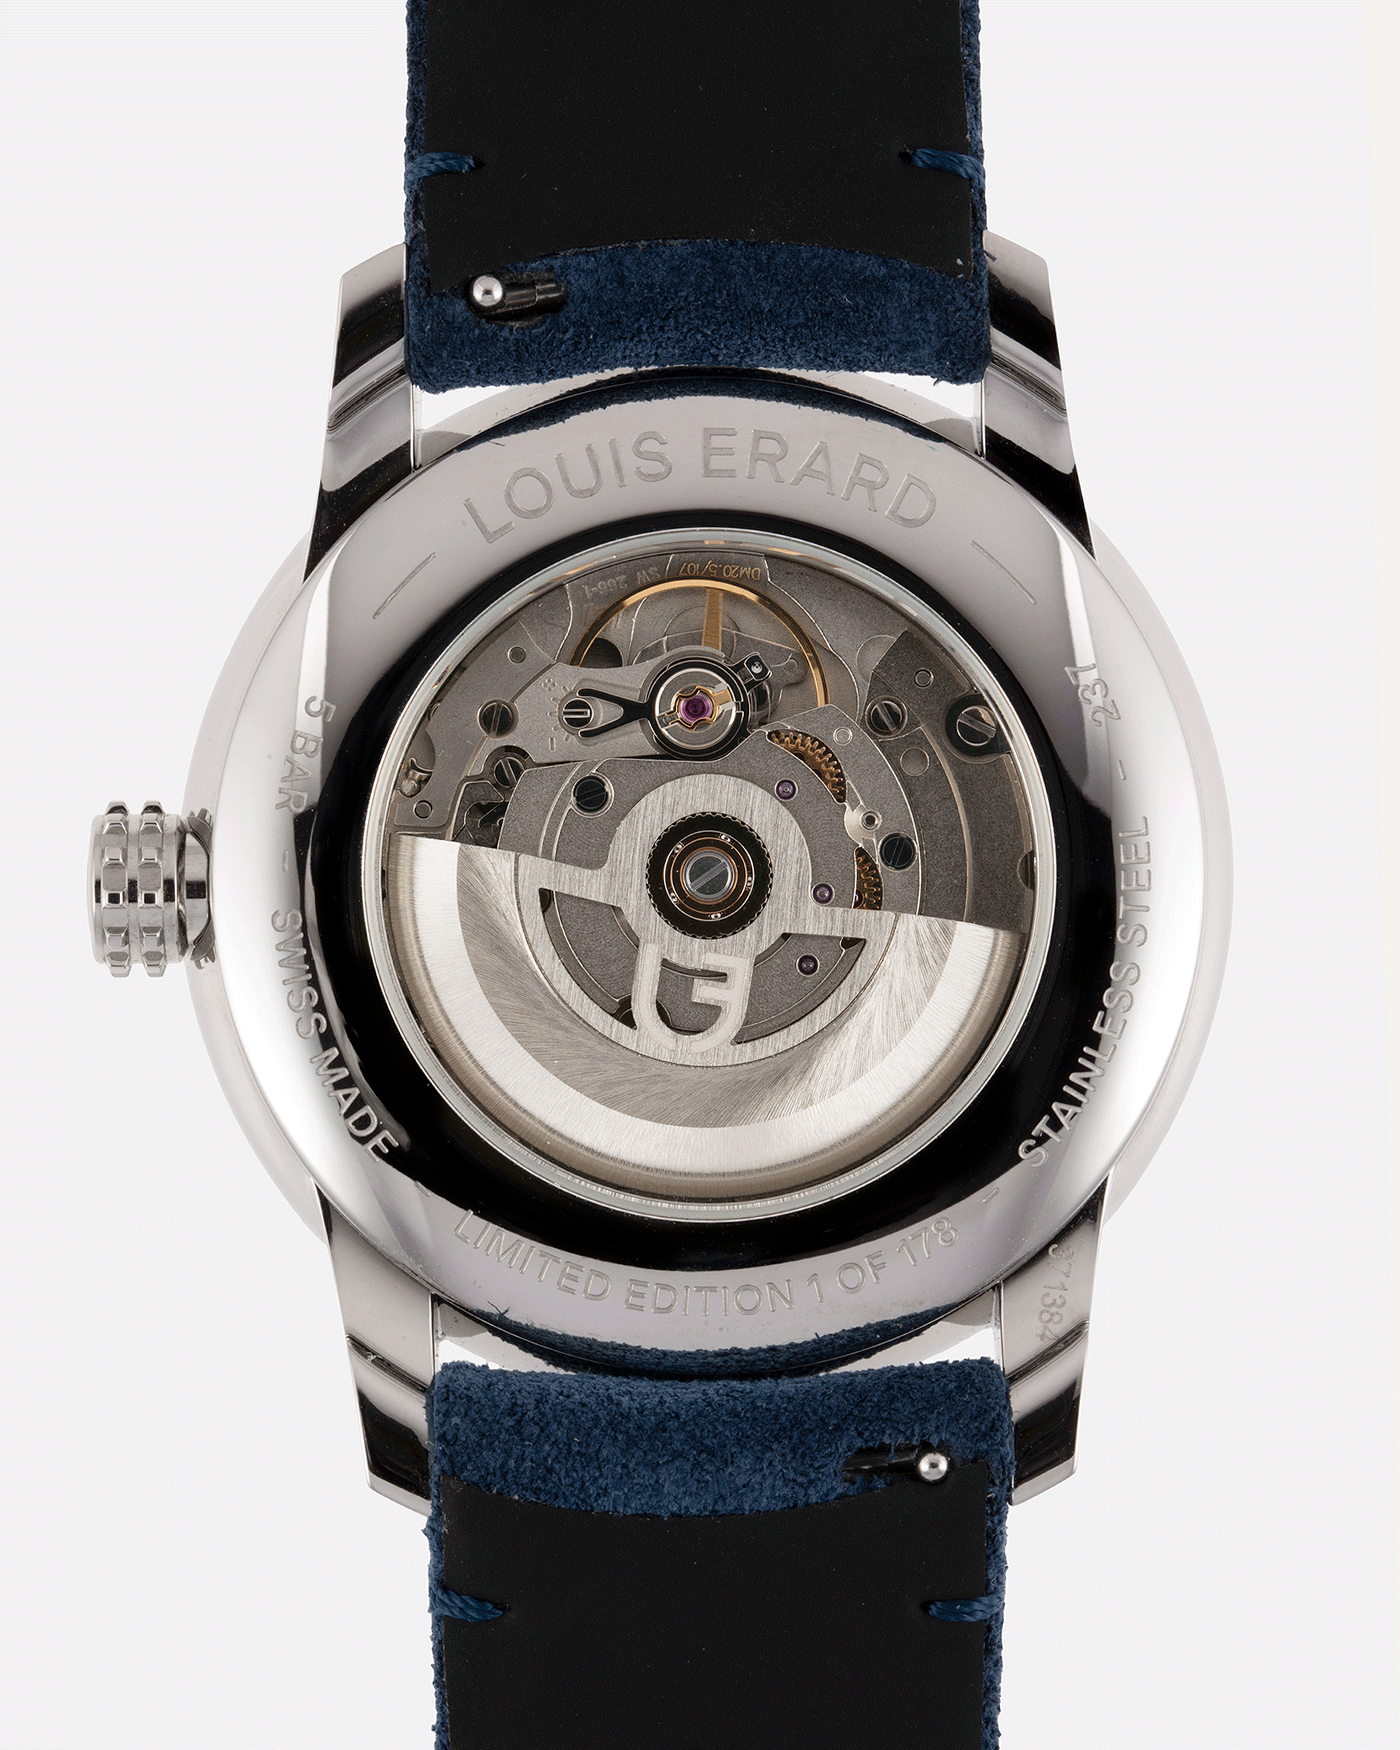 Brand: Louis Erard X Vianney Halter Year: 2020 Model: Le Regulateur Material: Stainless Steel Movement: Selitta Based Self Winding Movement Case Diameter: 42mm Bracelet/Strap: Louis Erard Blue Suede Strap with Stainless Steel Tang Buckle